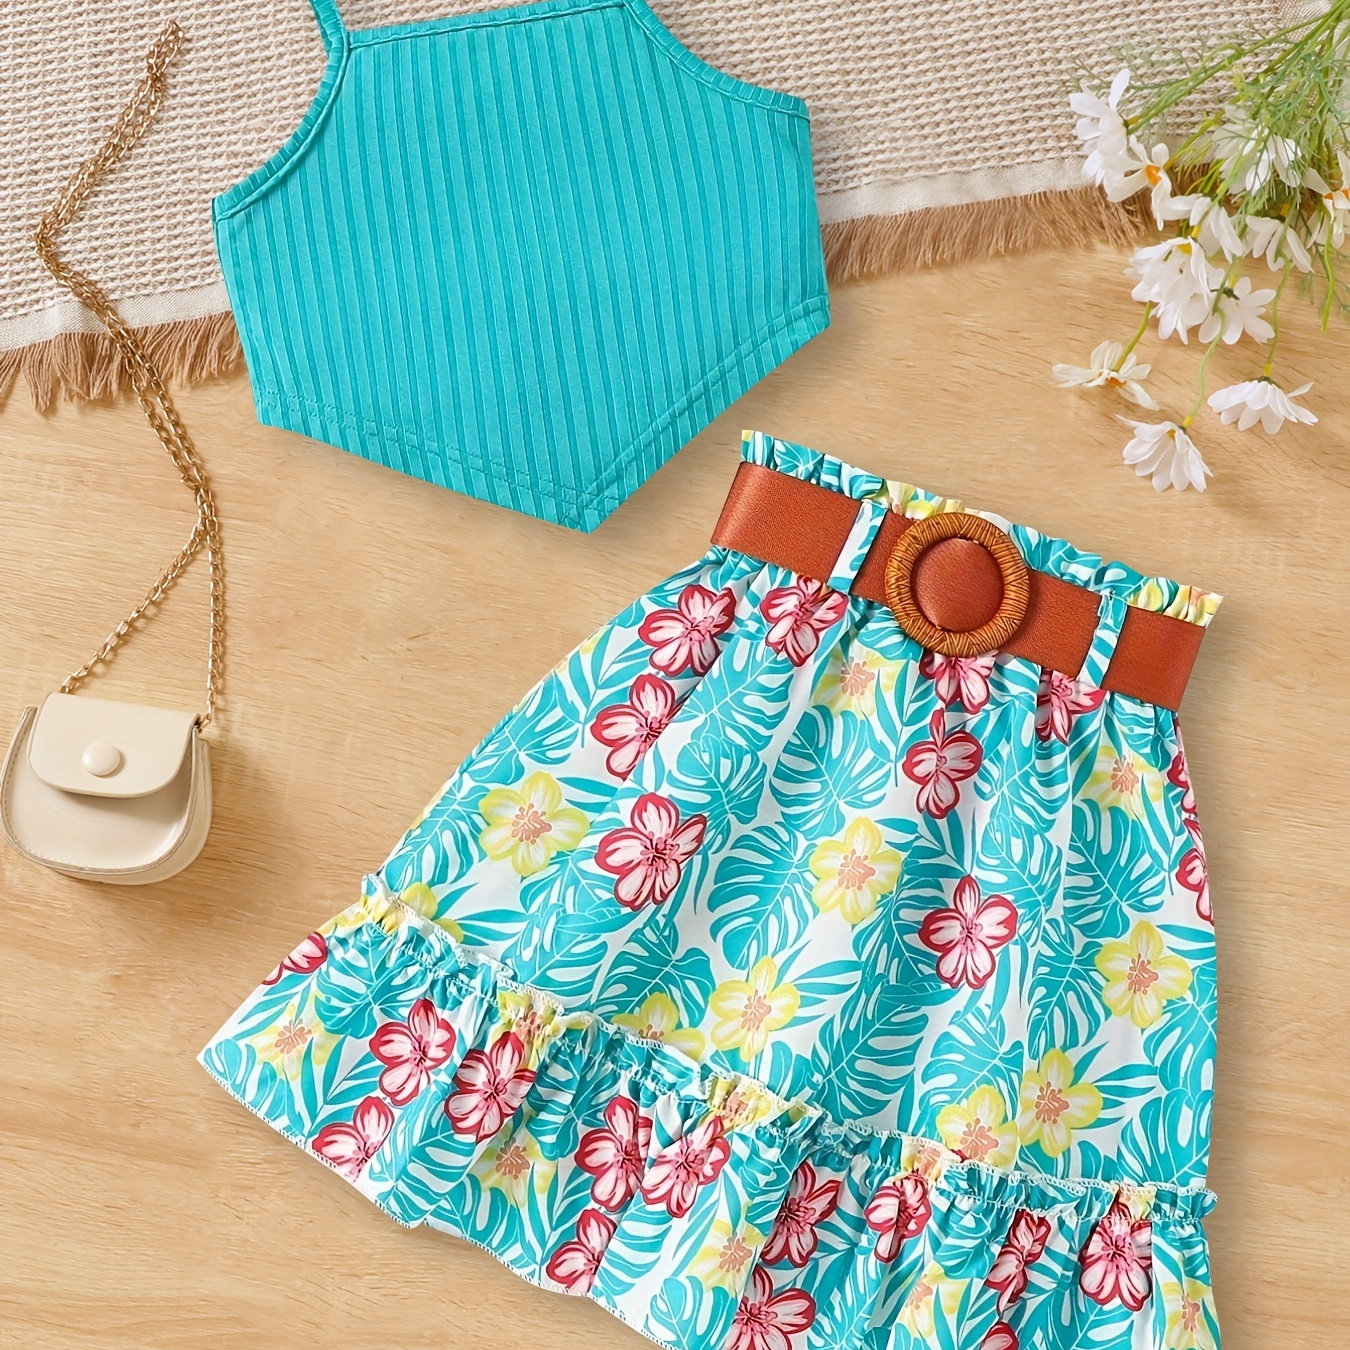 

Girls Tropical Blue Suit Asymmetric Hem Cami Top And High Waist Skirt Set For Vacation Summer Outfit